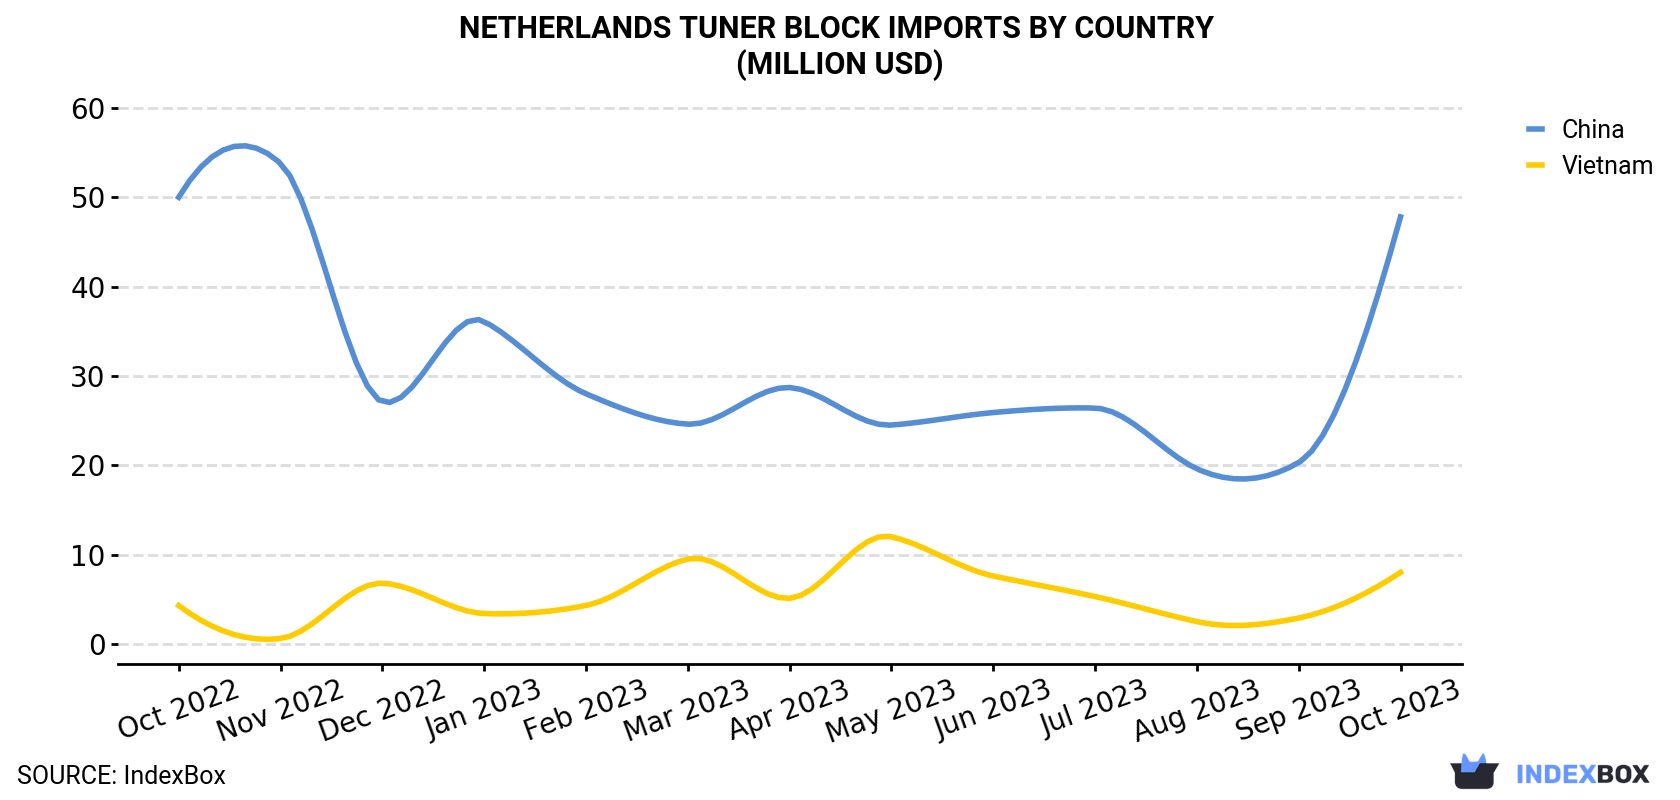 Netherlands Tuner Block Imports By Country (Million USD)